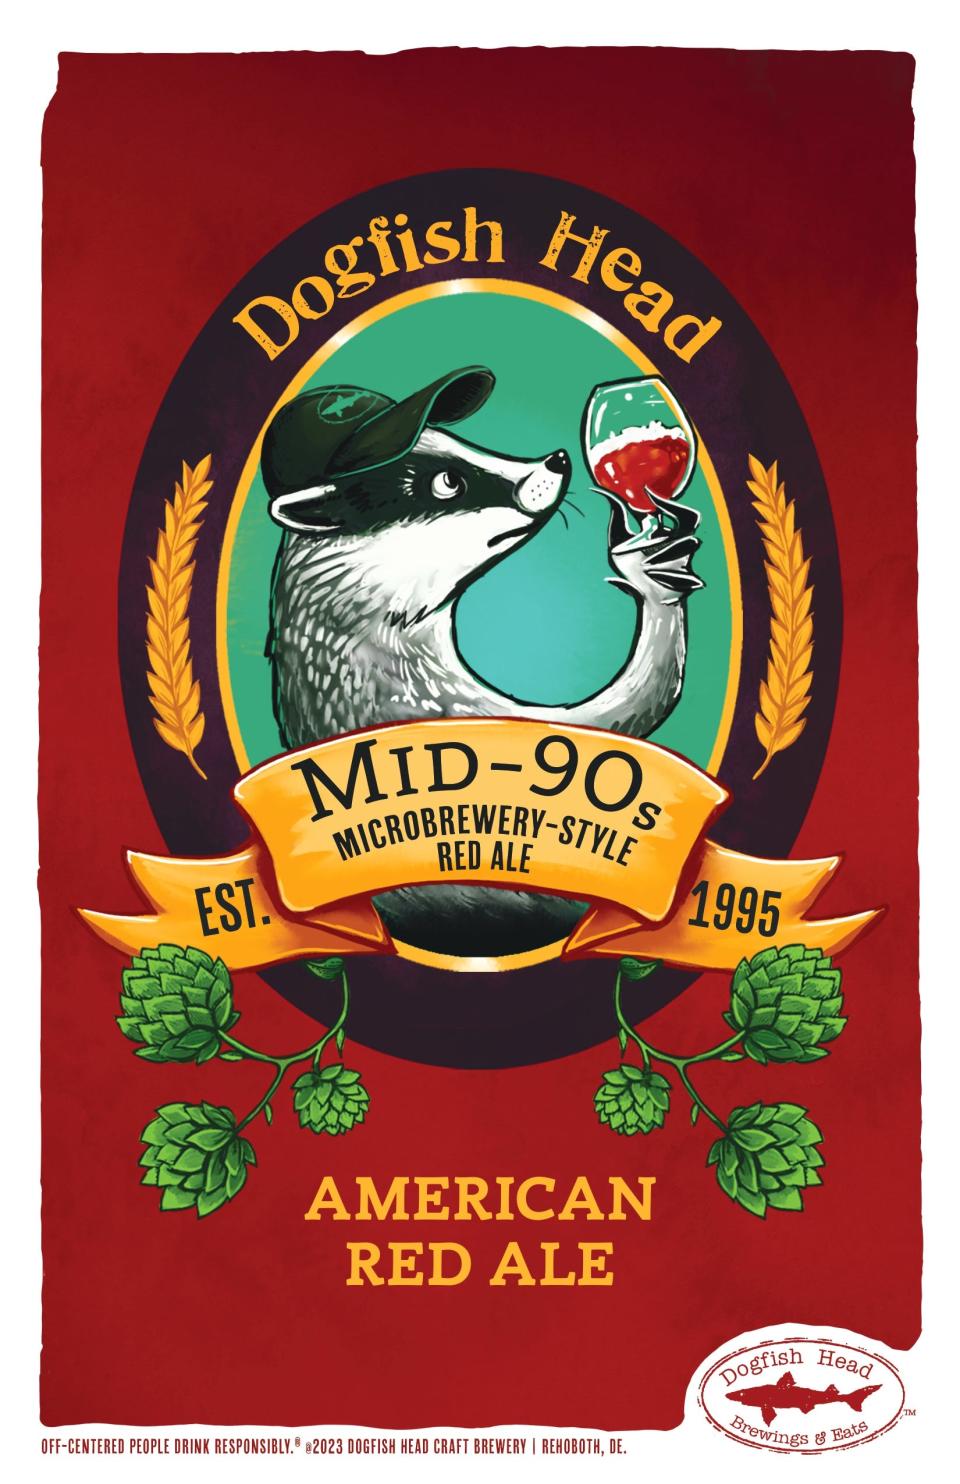 Dogfish Head's new limited edition Red Ale will be first available at Wednesday's Middle-Aged Dad Jam Band show in Rehoboth Beach.